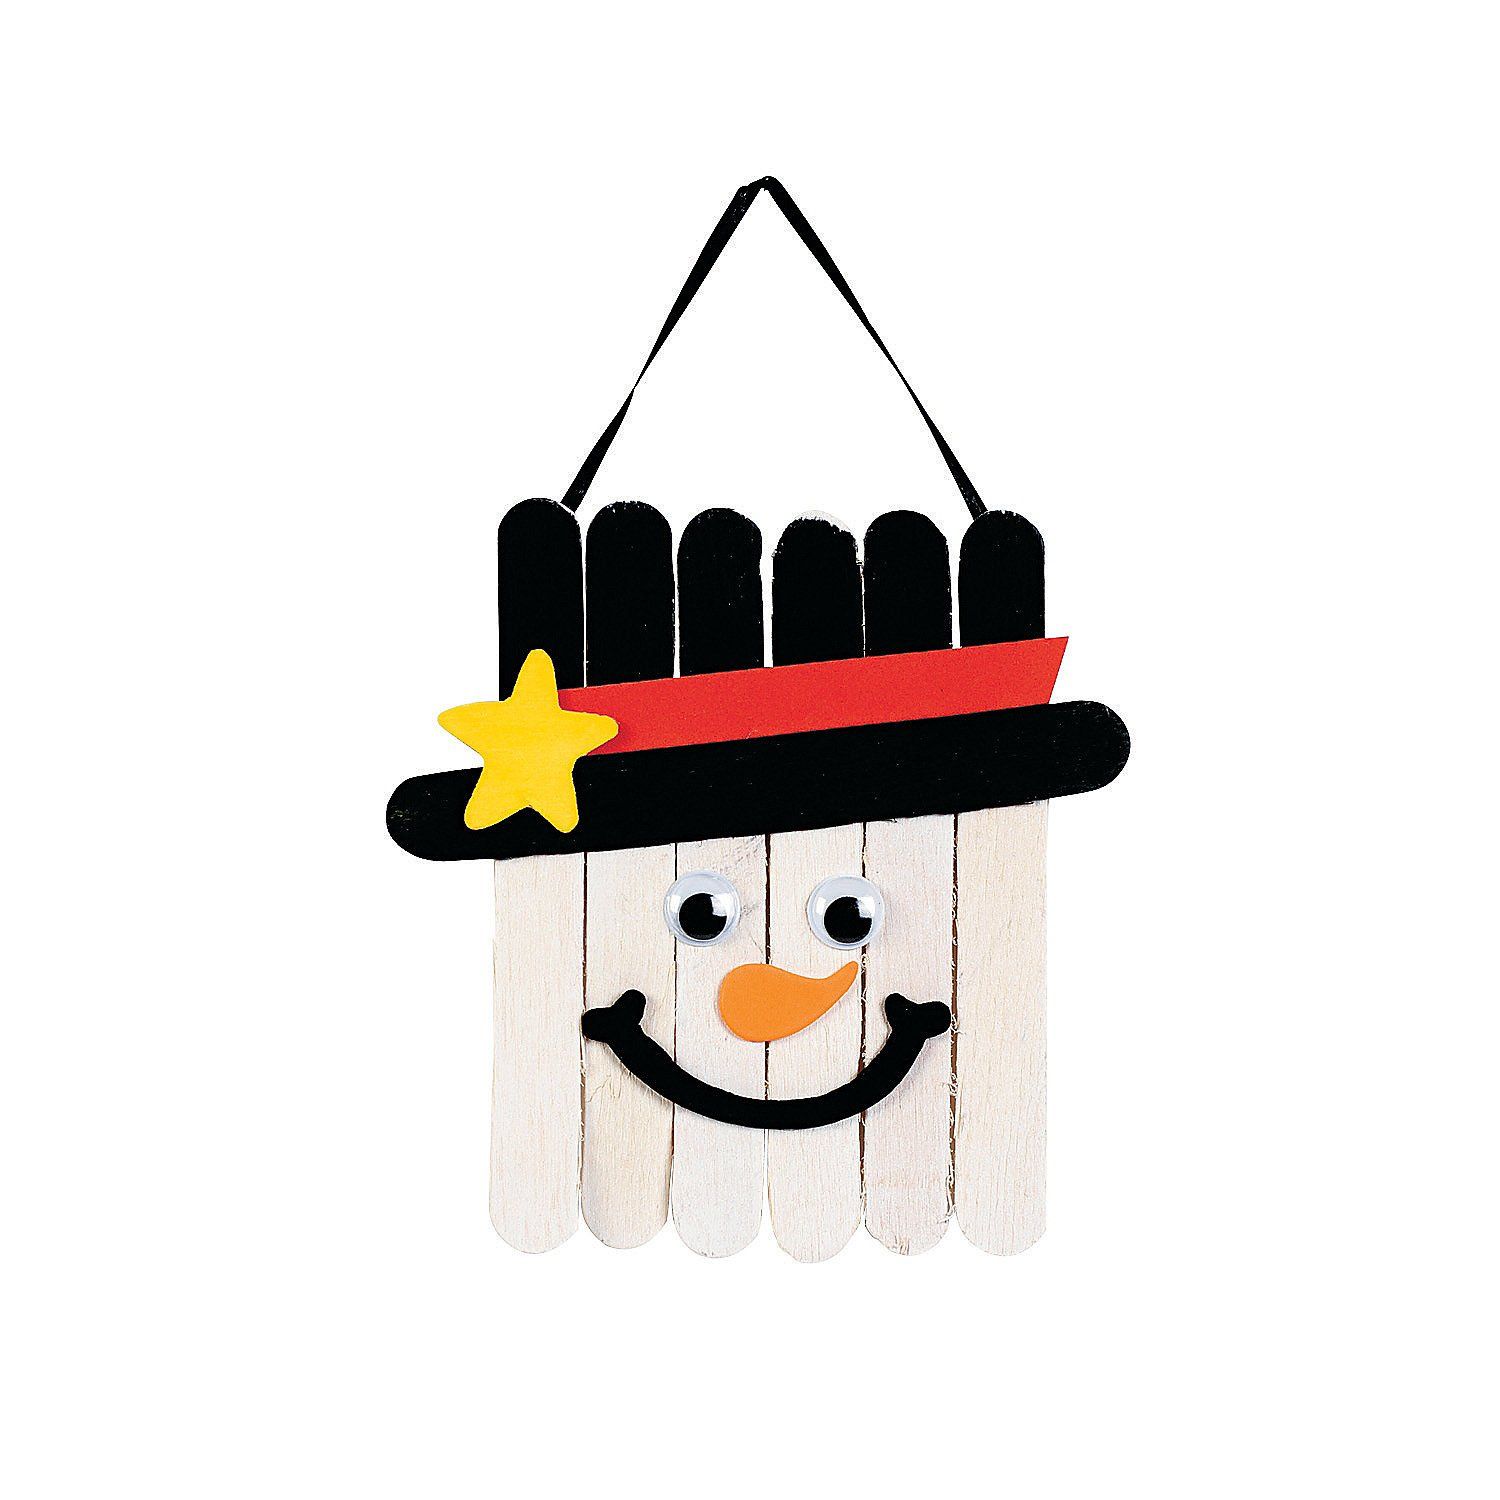 Popsicle sticks formed a face of snowman painted with black and white attached with googly eyes and a smile